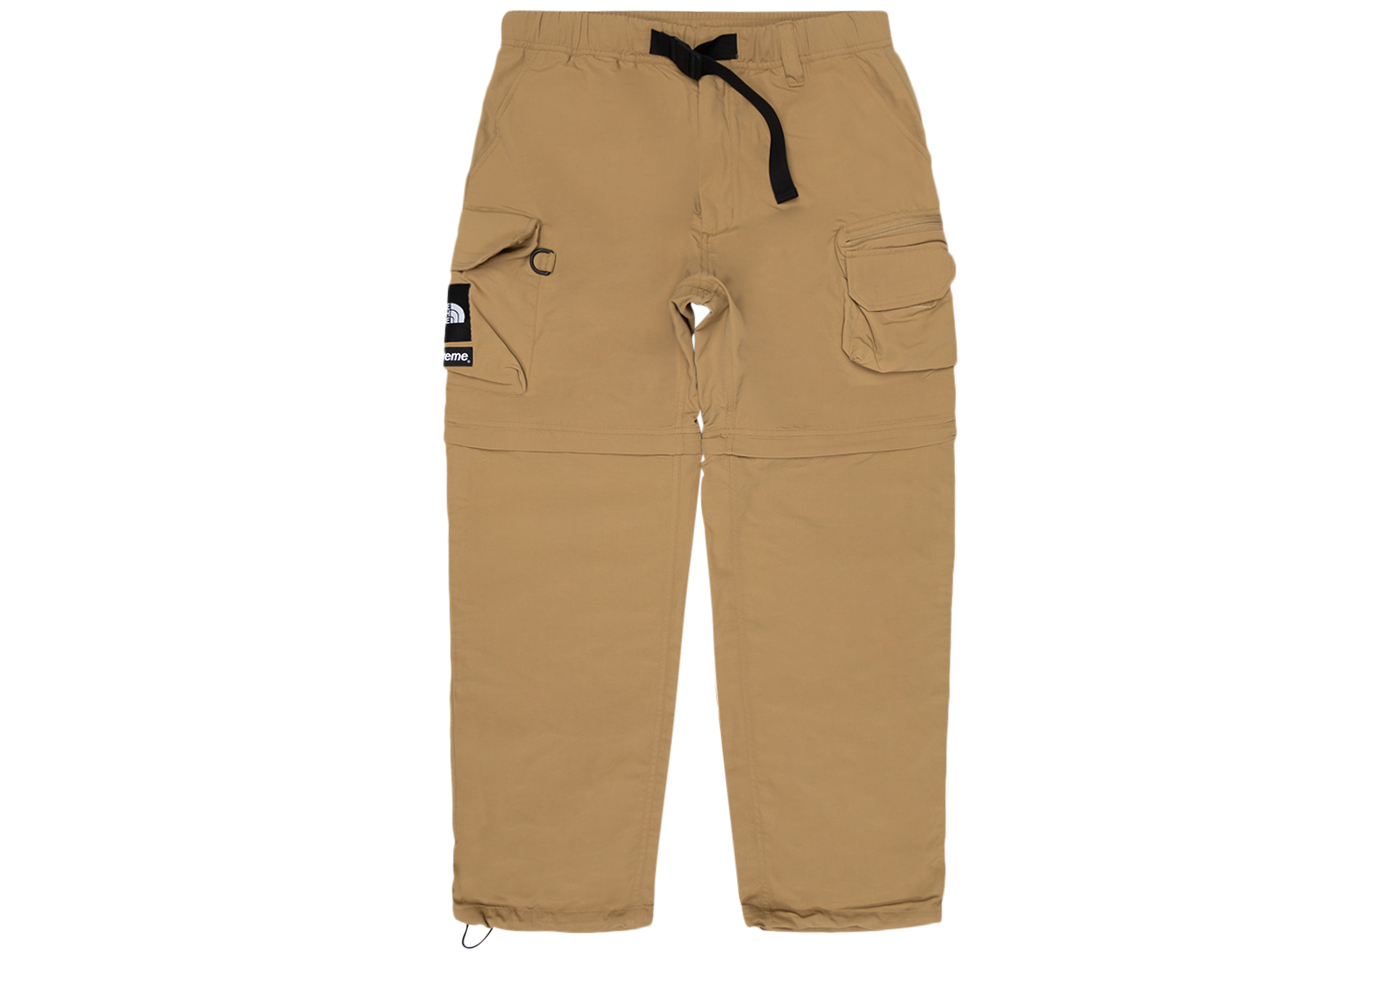 Supreme/North Face Belted Cargo Pant